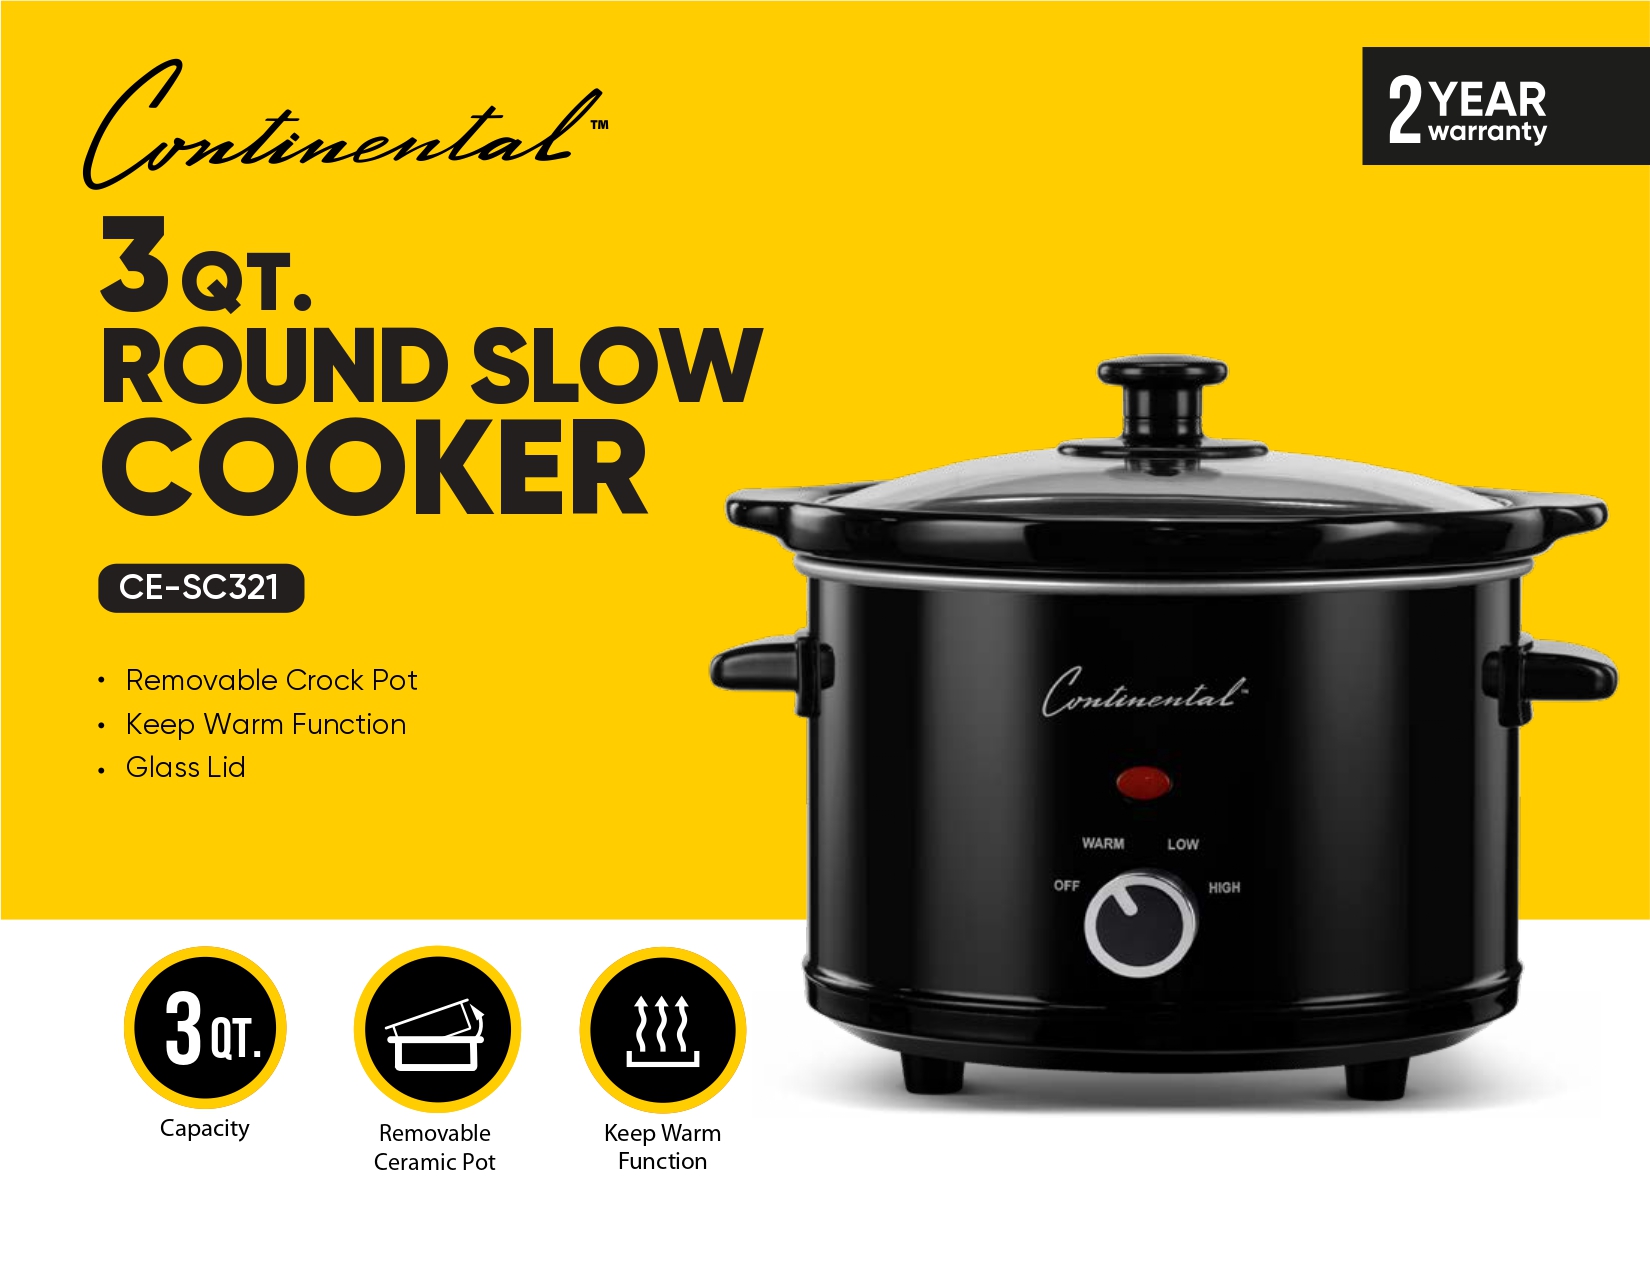 3QT. ROUND SLOW COOKER